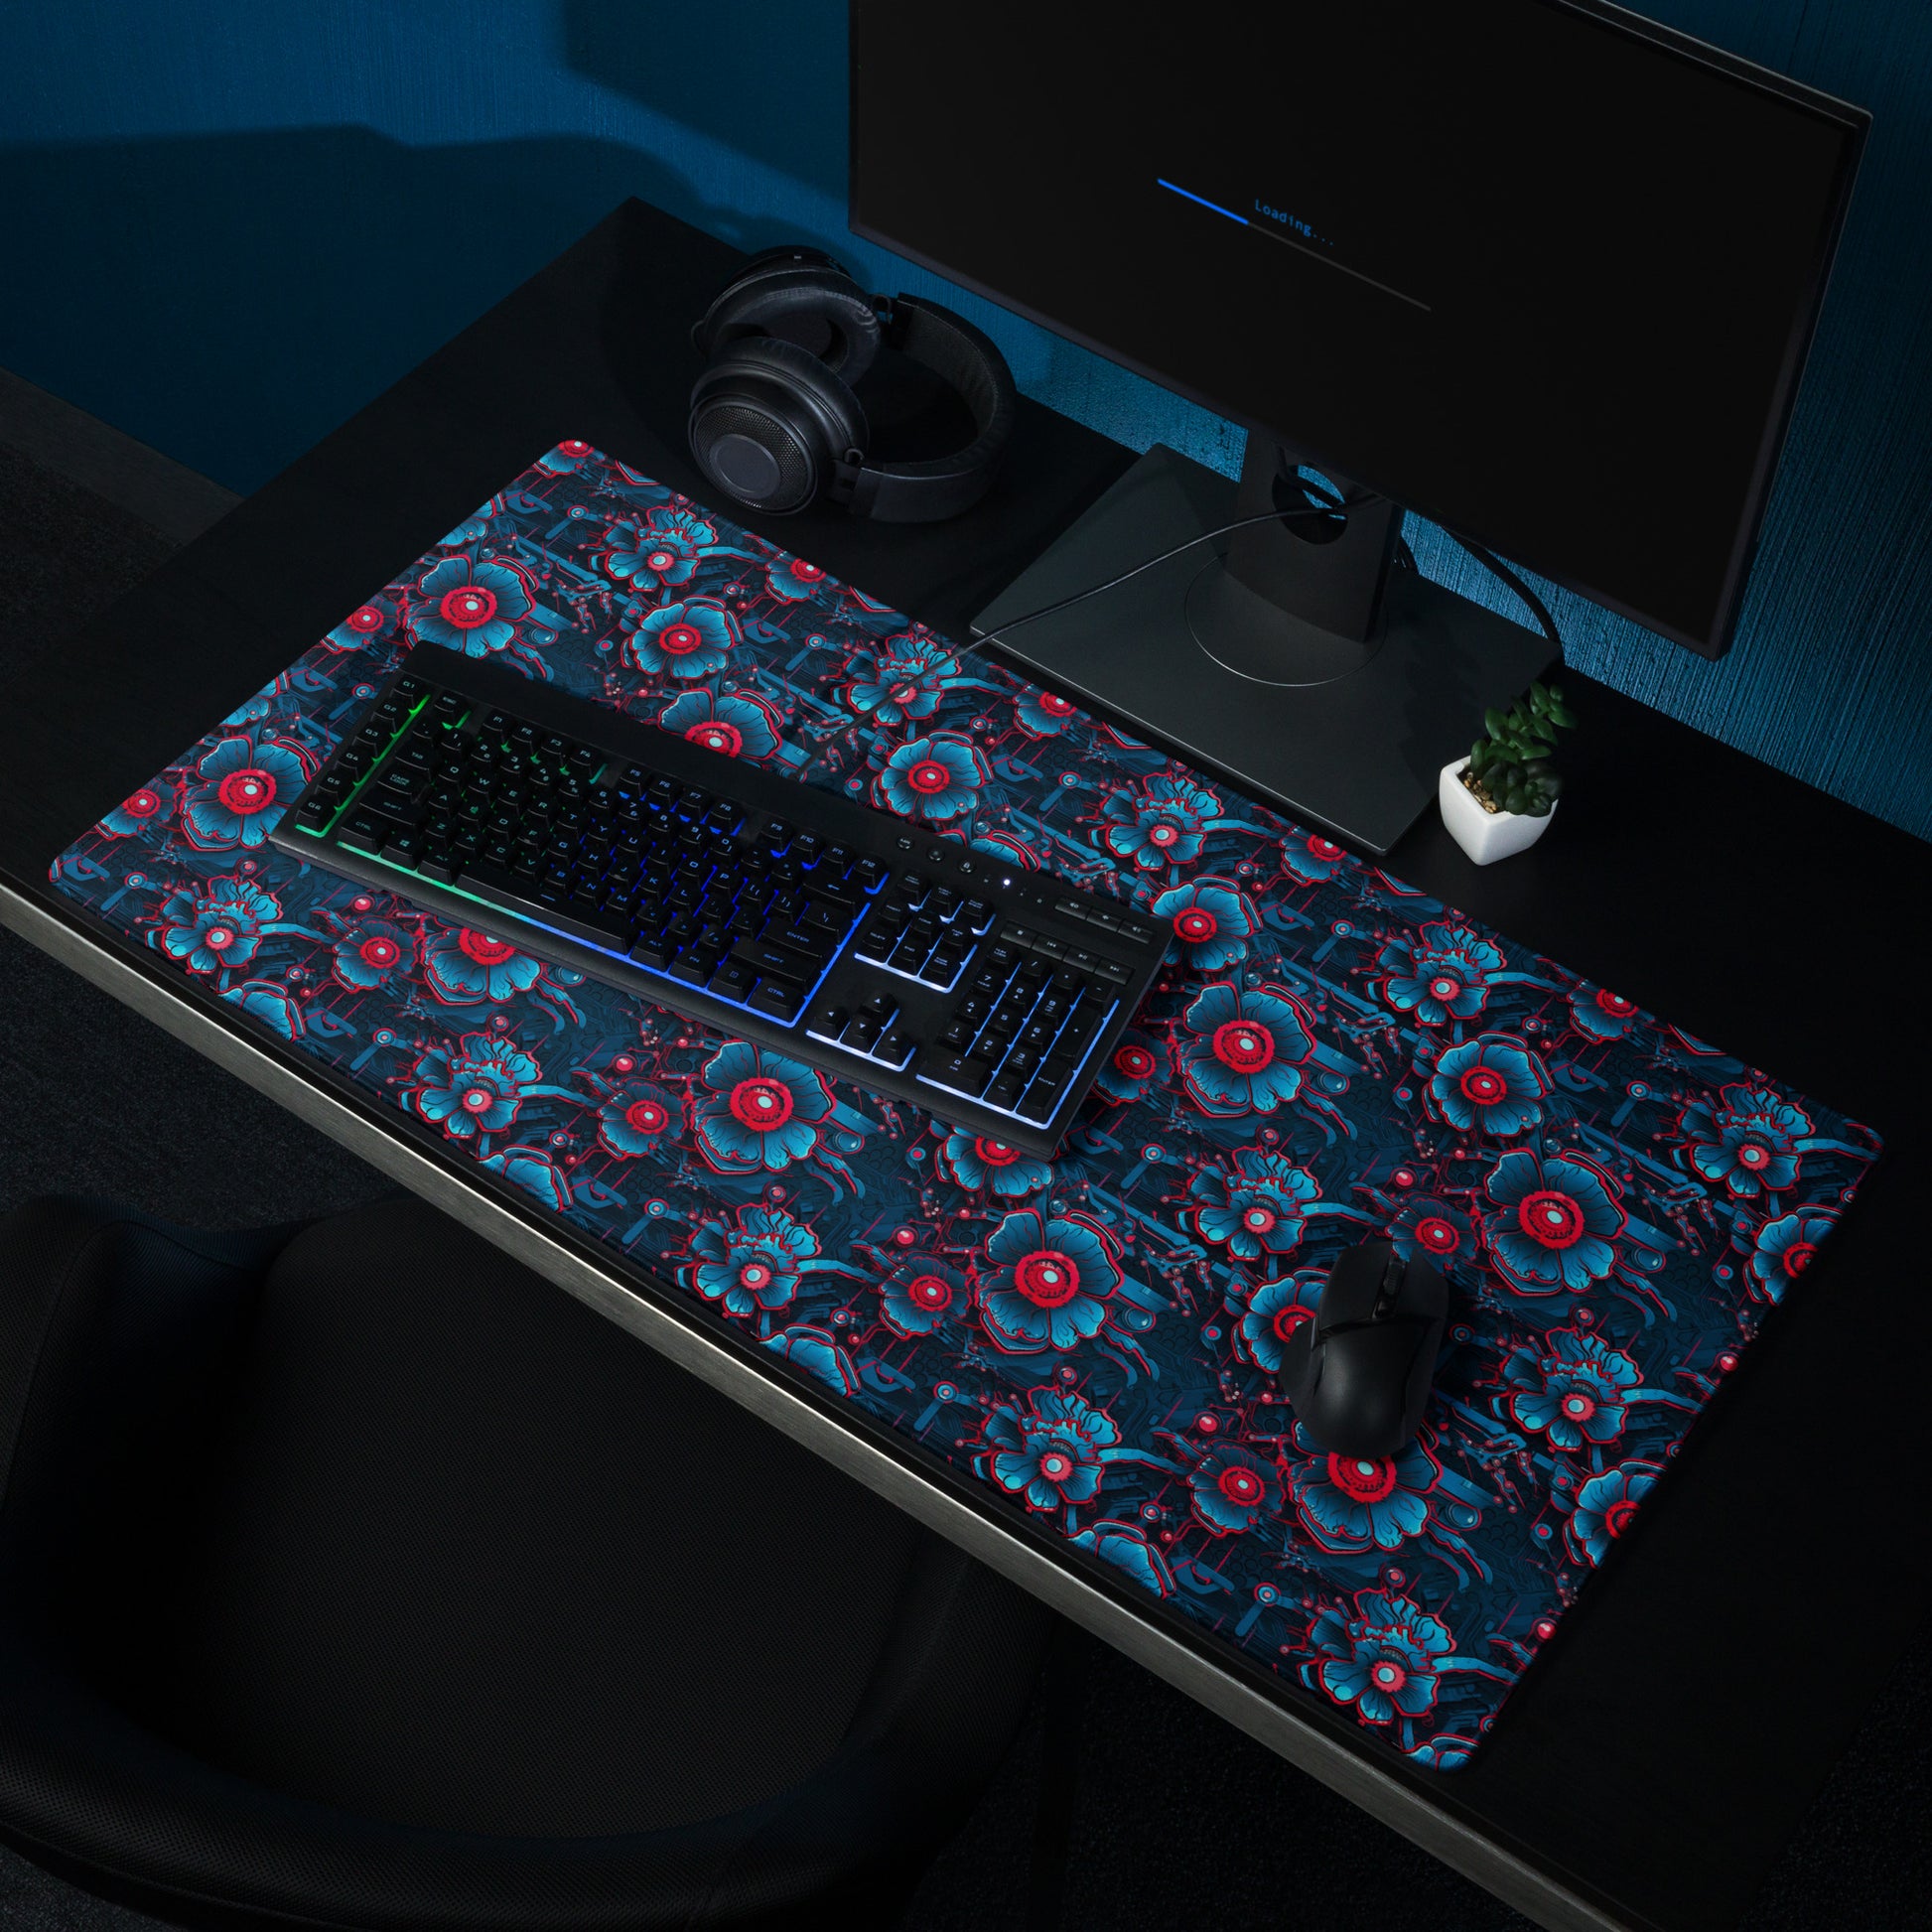 A 36" x 18" desk pad with a blue and red robotic floral pattern sitting on a desk.